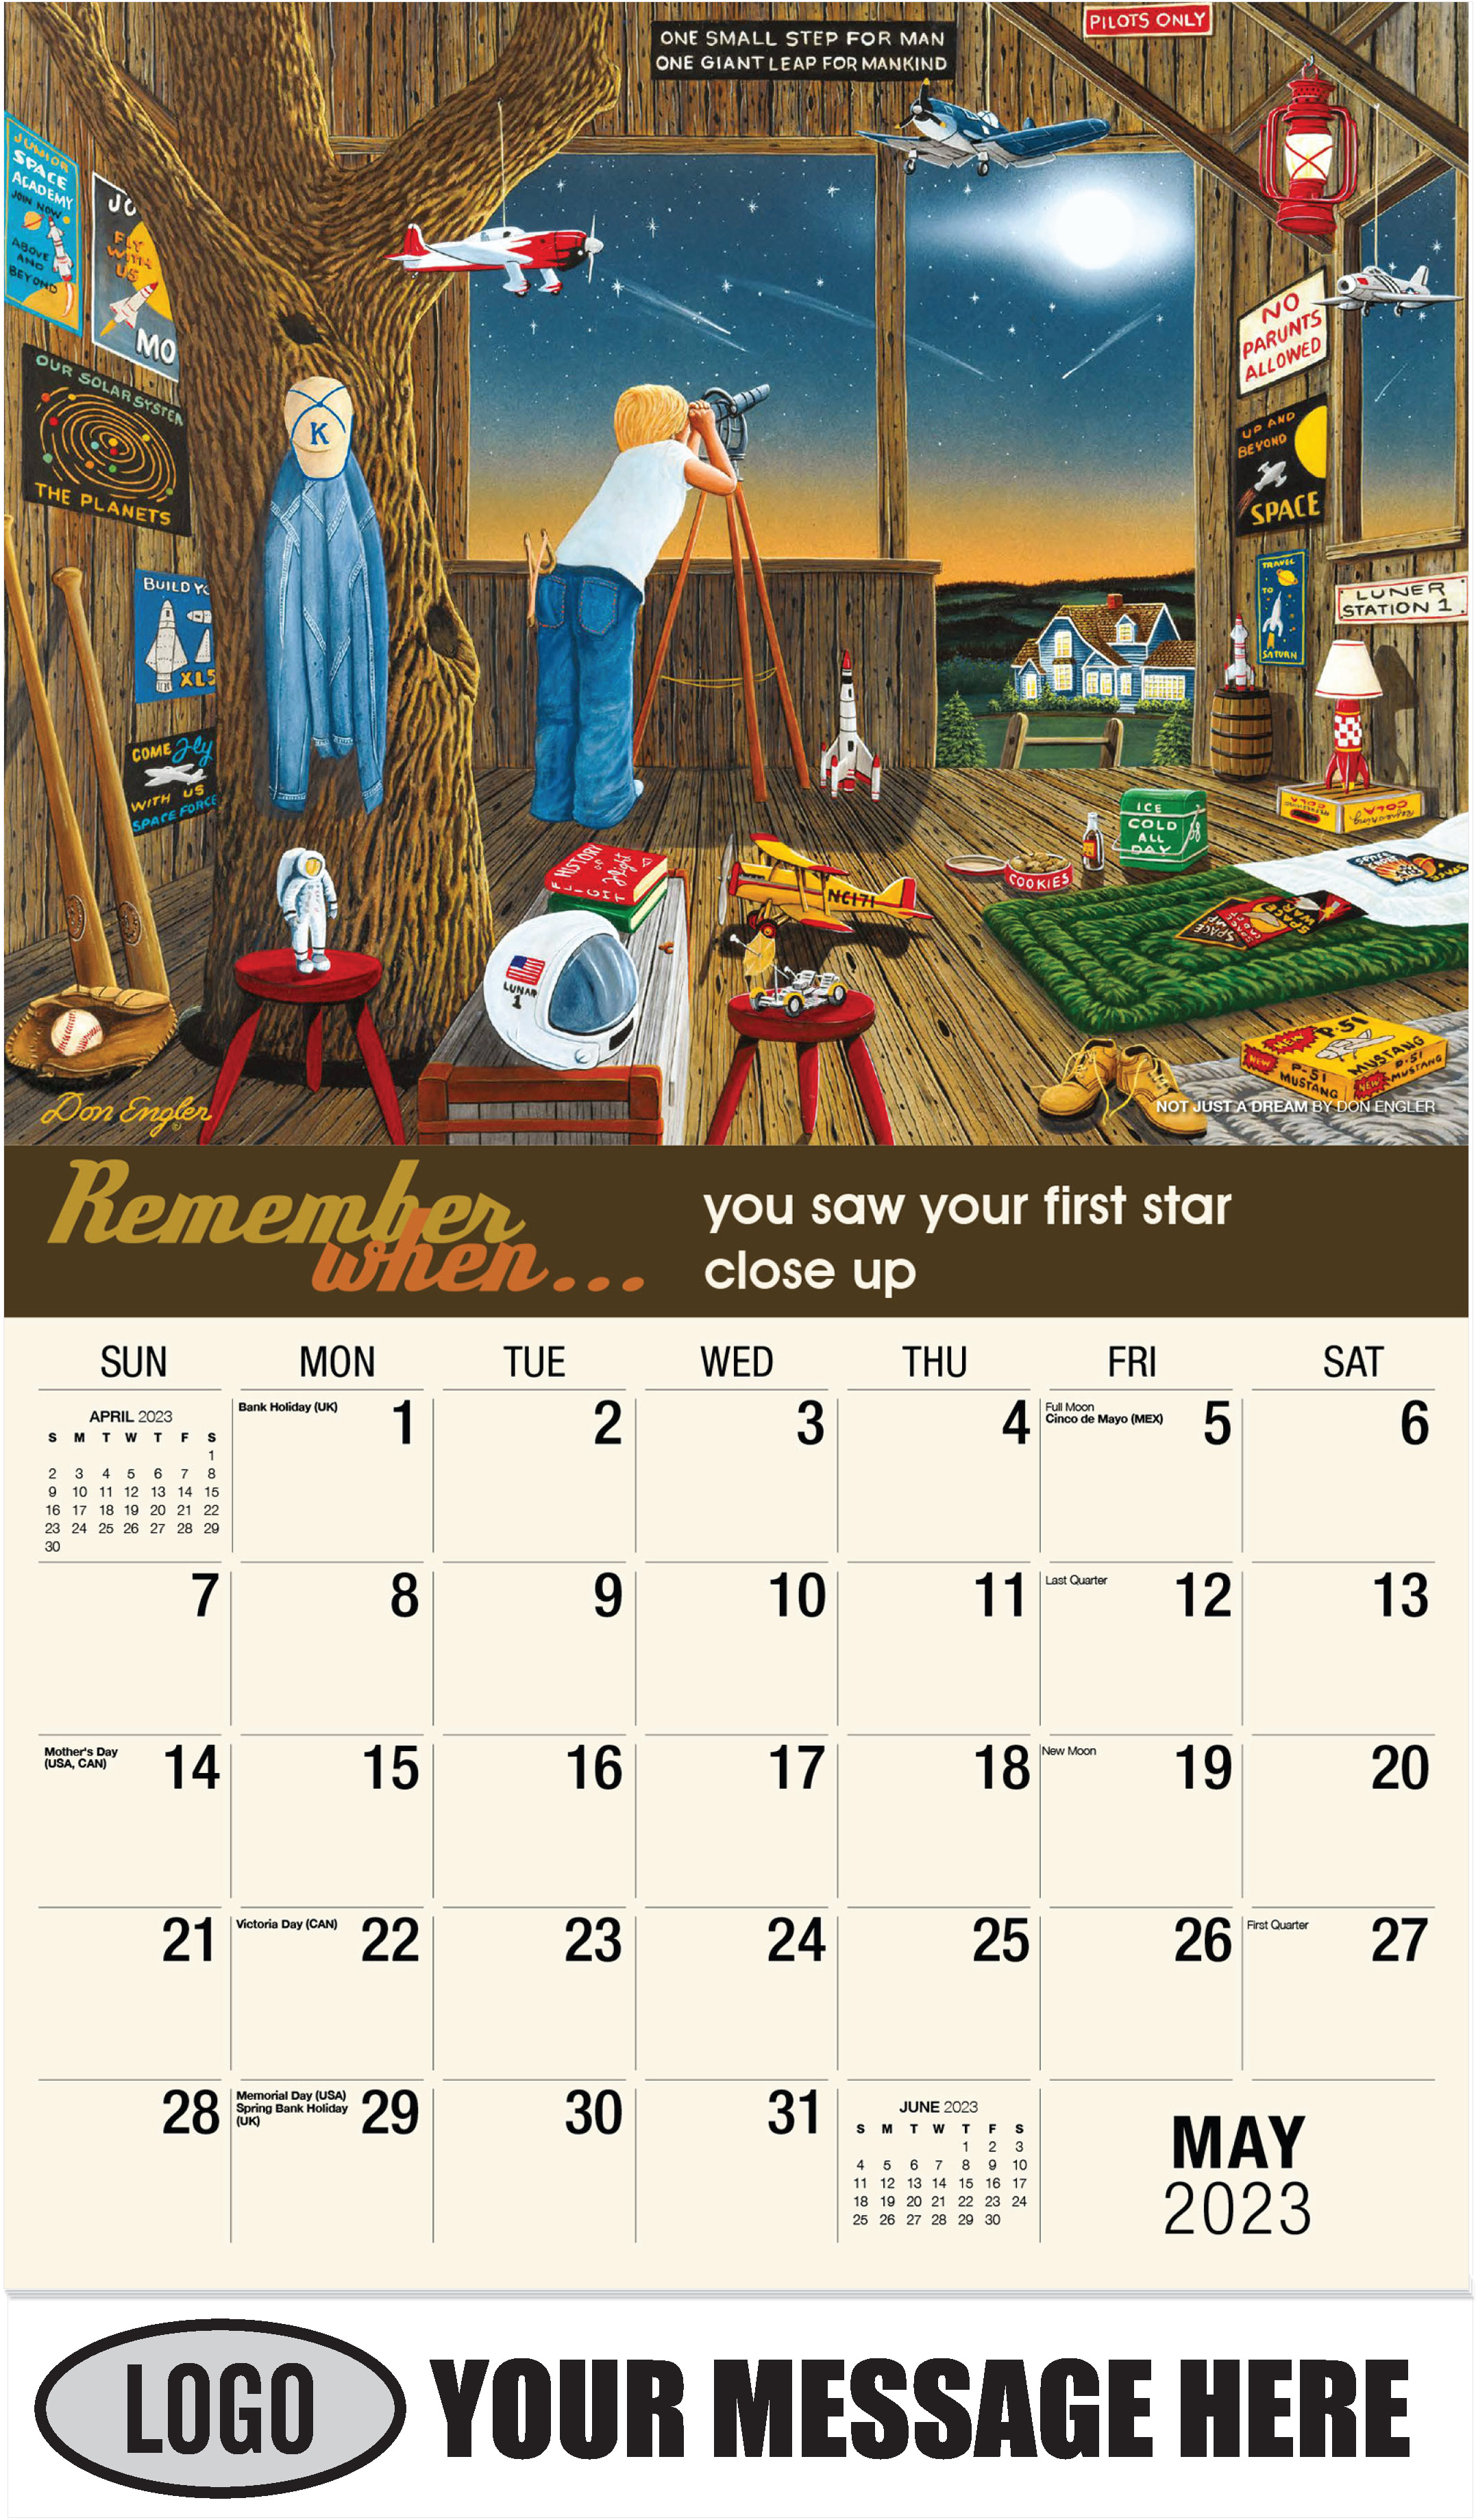 Not Just A Dream by Don Engler - May - Remember When 2023 Promotional Calendar